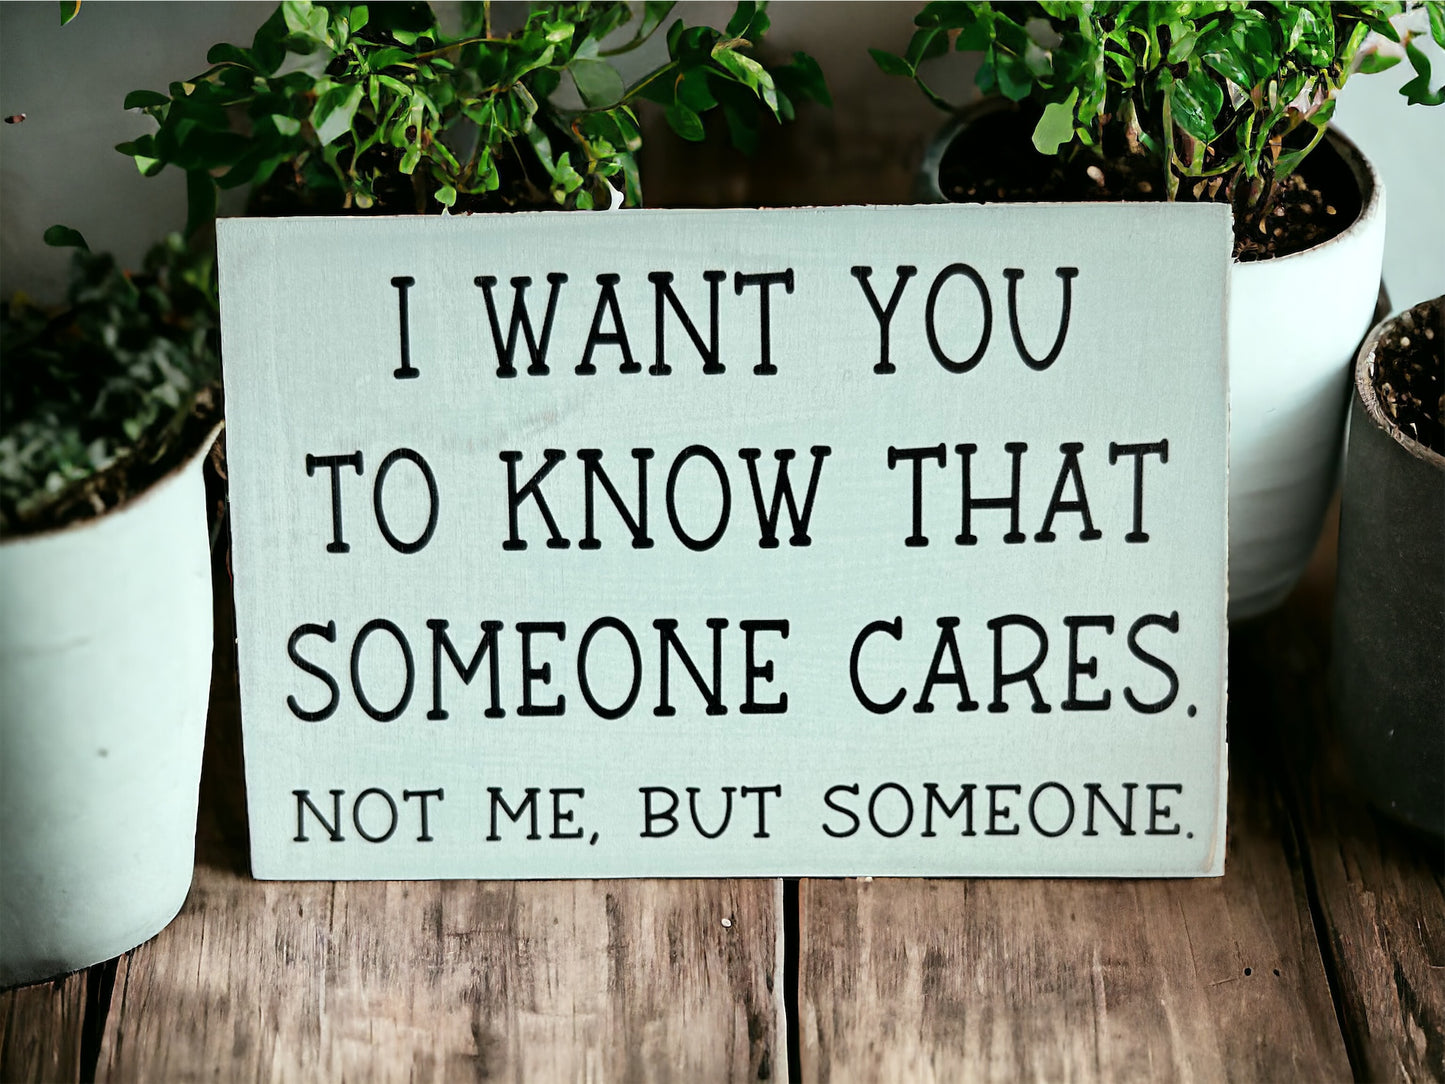 Someone Cares - Funny Rustic Shelf Sitter